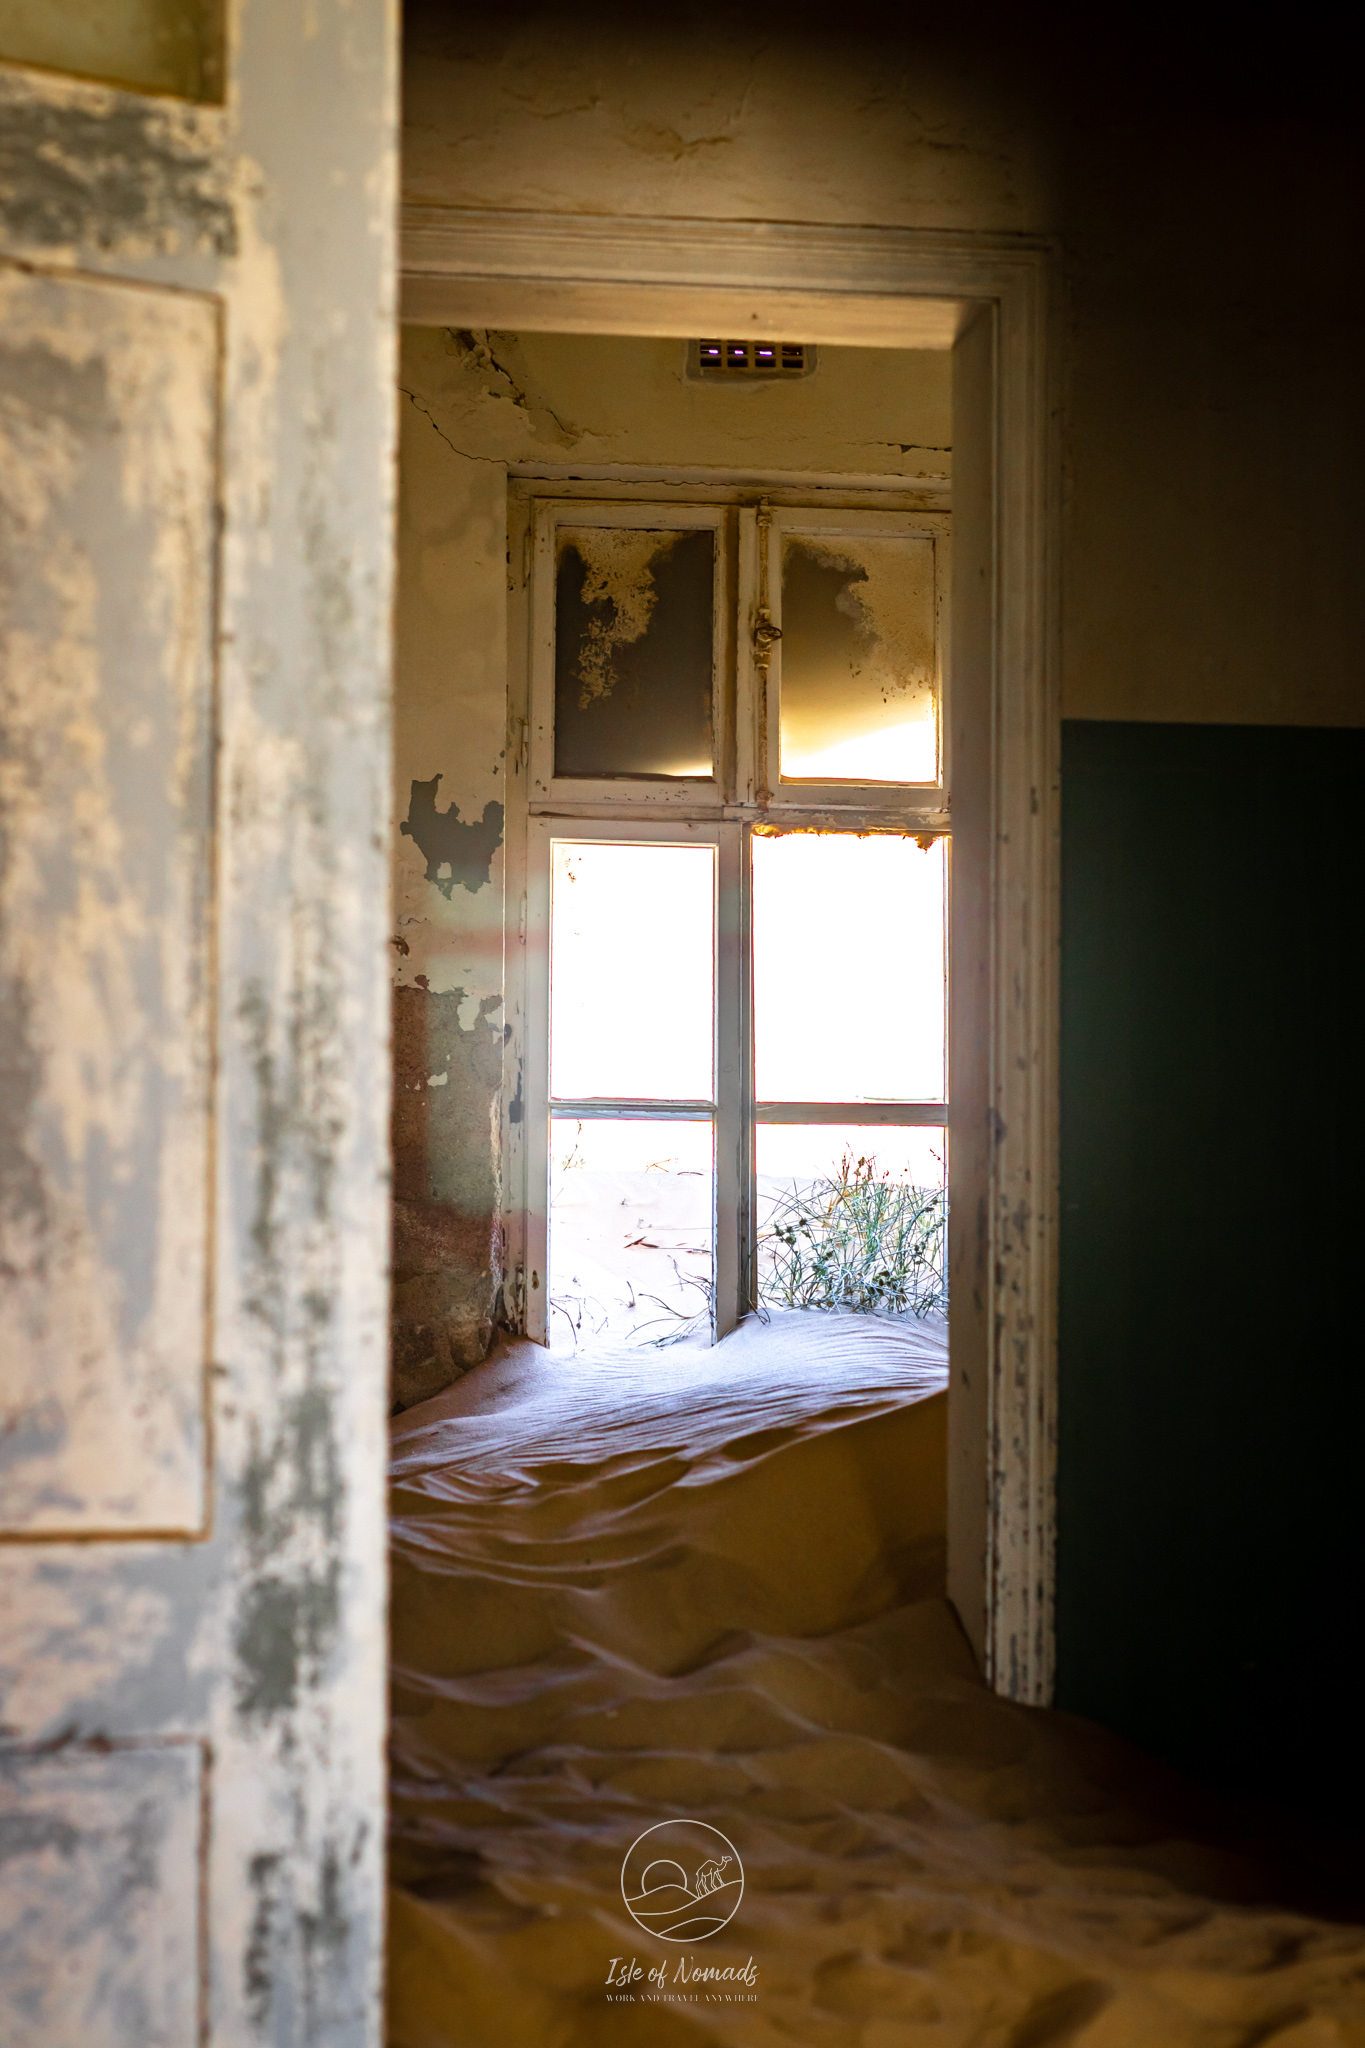 Kolmanskop is an old Gold Mining Town that is slowly being reclaimed by the desert...